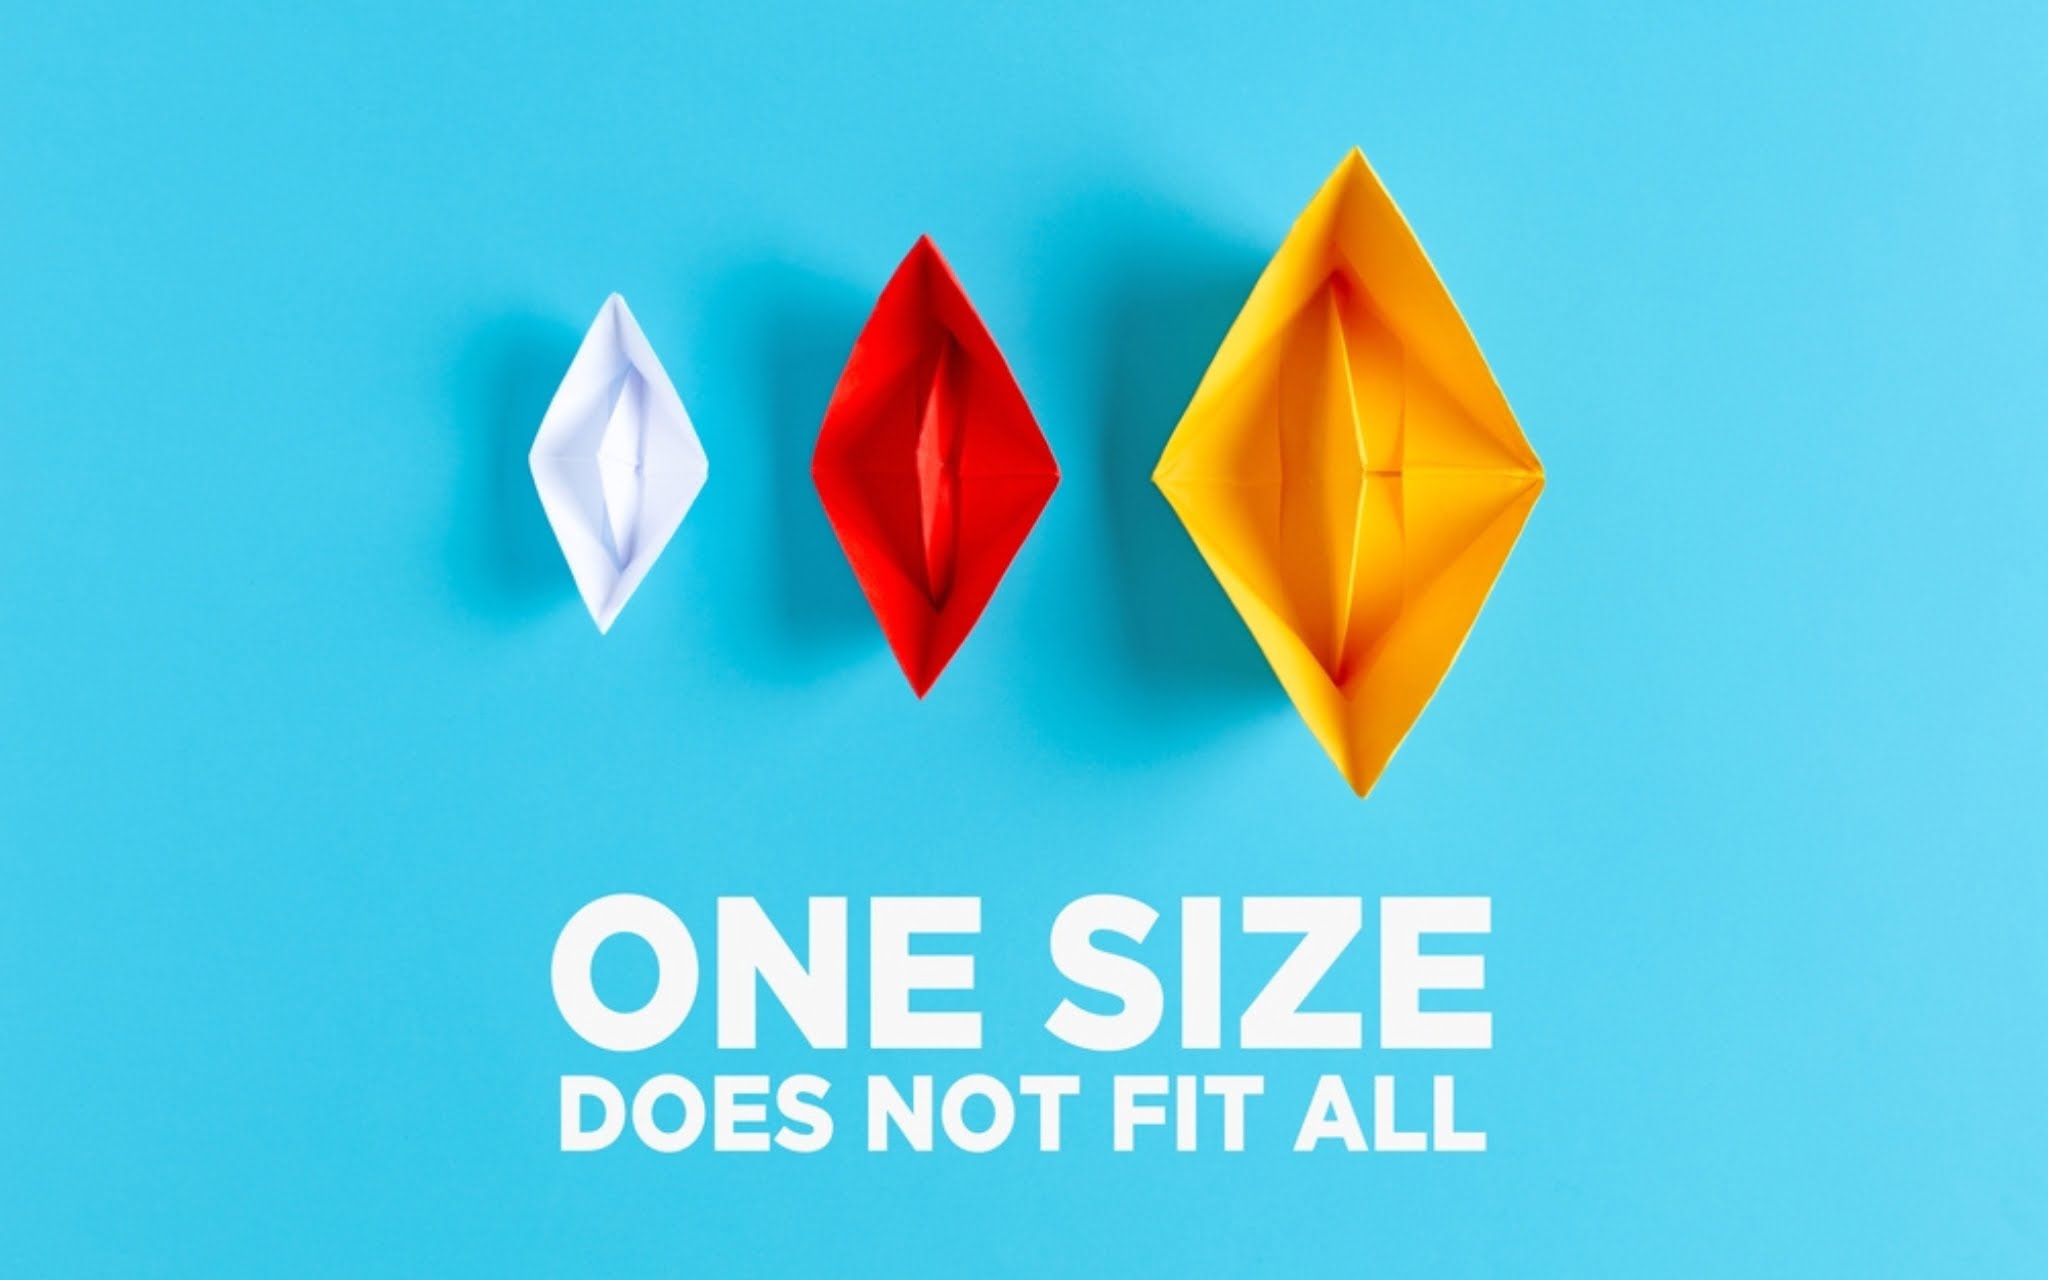 Image sizing header image reading 'one size does not fit all'